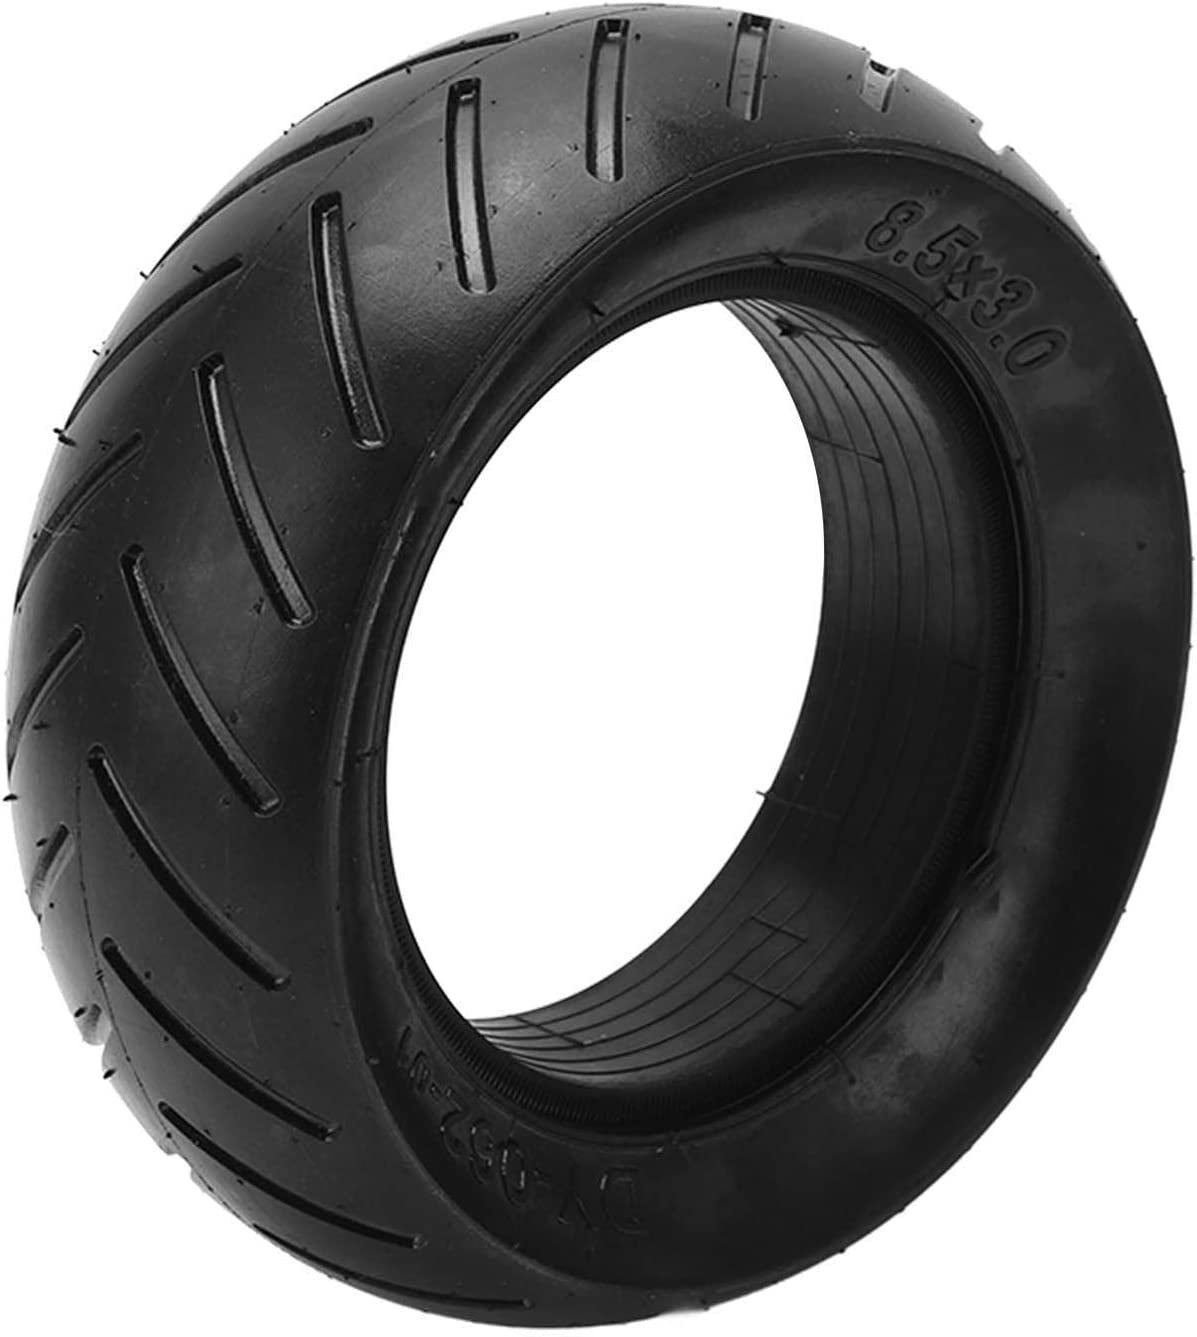 Electric Scooter Tires 8.5x2.0, 8.5 Inch Scooter Tire Solid for Smooth  Ride, Scooter Rubber Explosion-Proof Front Or Rear Replacement Tubeless  Solid